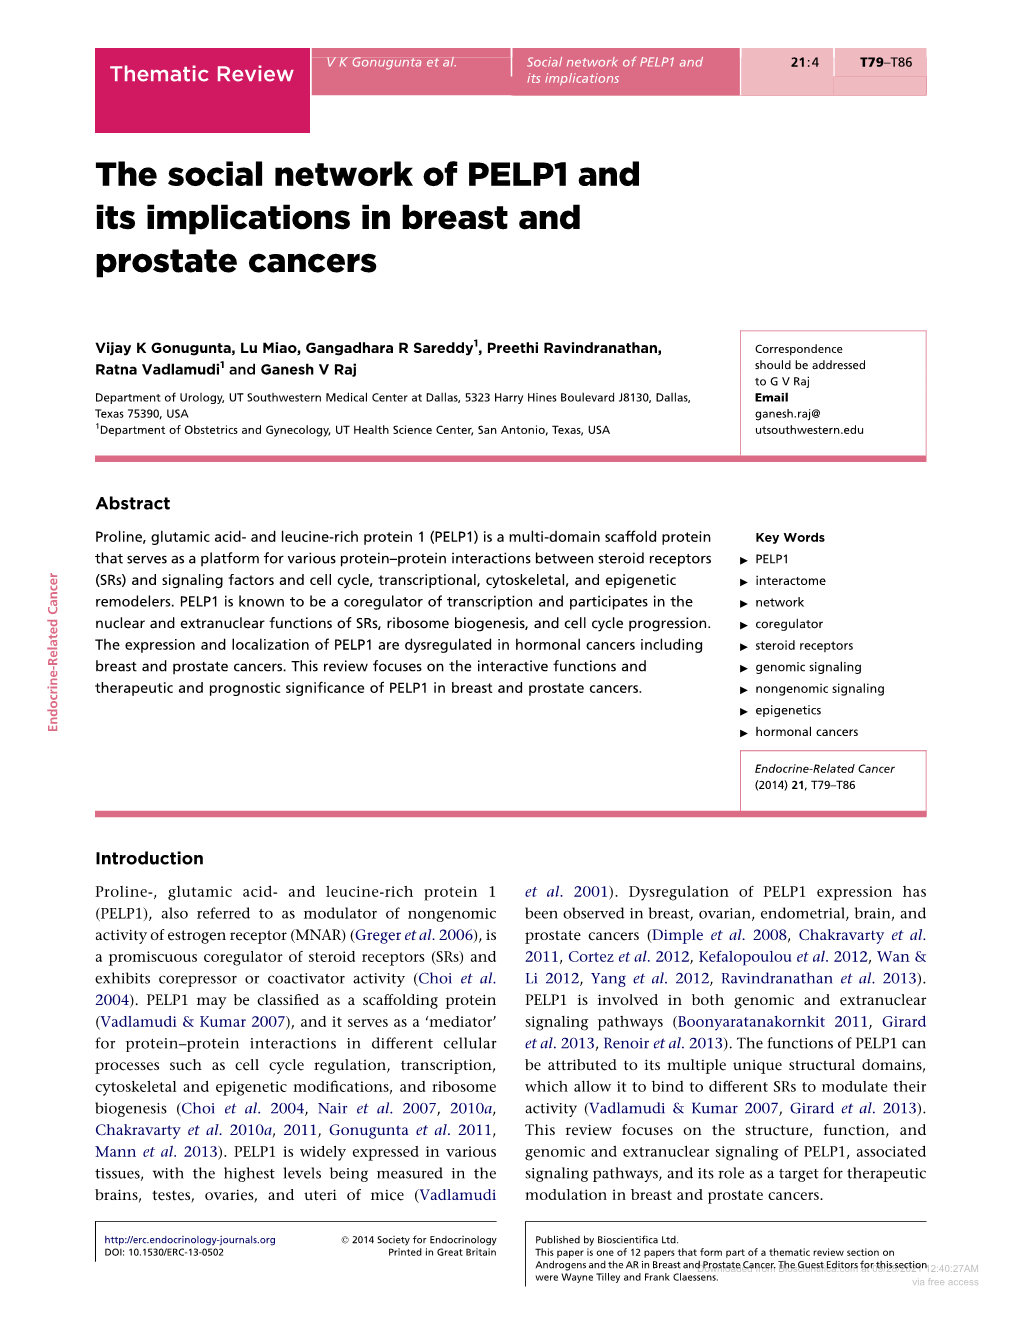 The Social Network of PELP1 and Its Implications in Breast and Prostate Cancers